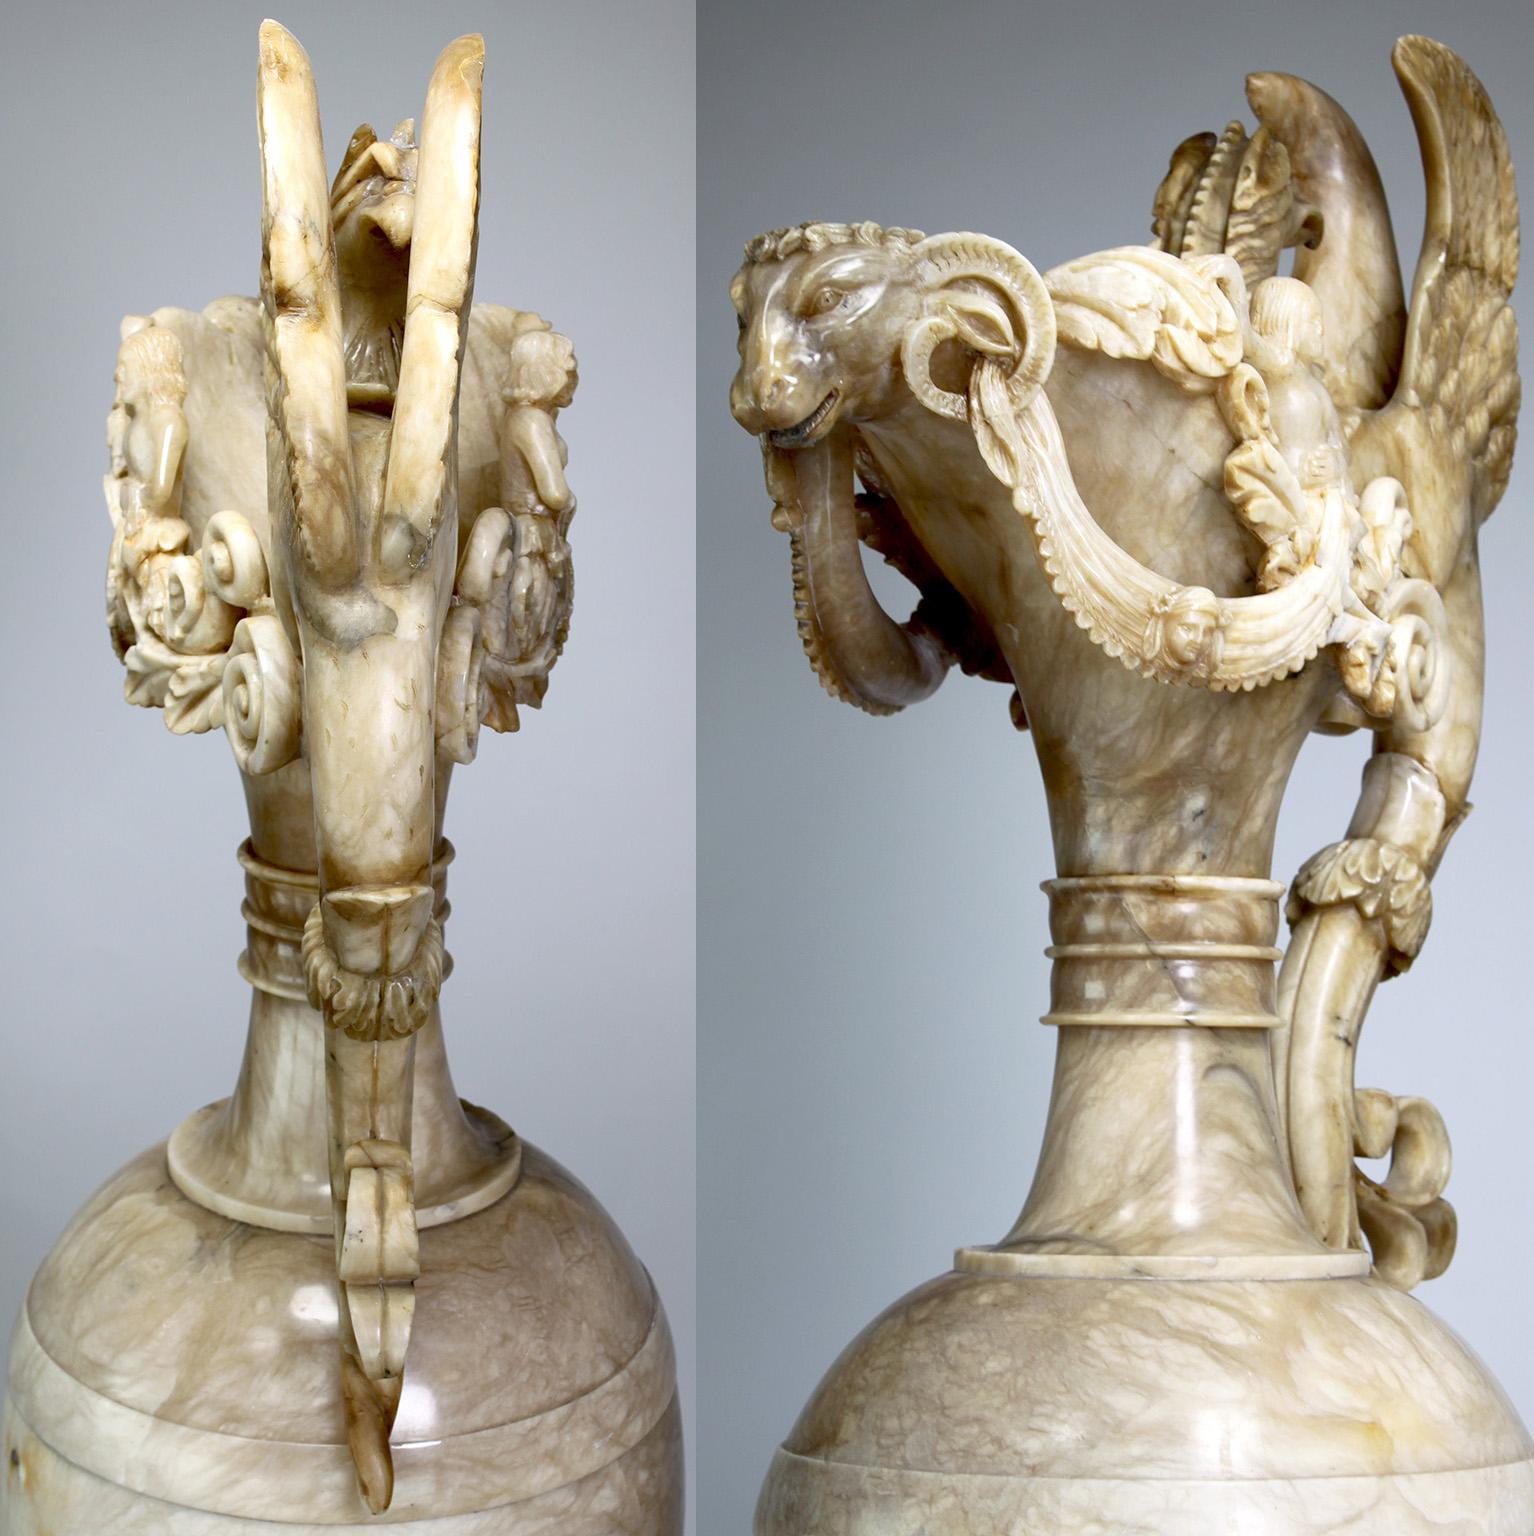 Monumental Italian 19th Century Renaissance Revival Style Carved Alabaster Urn  For Sale 8